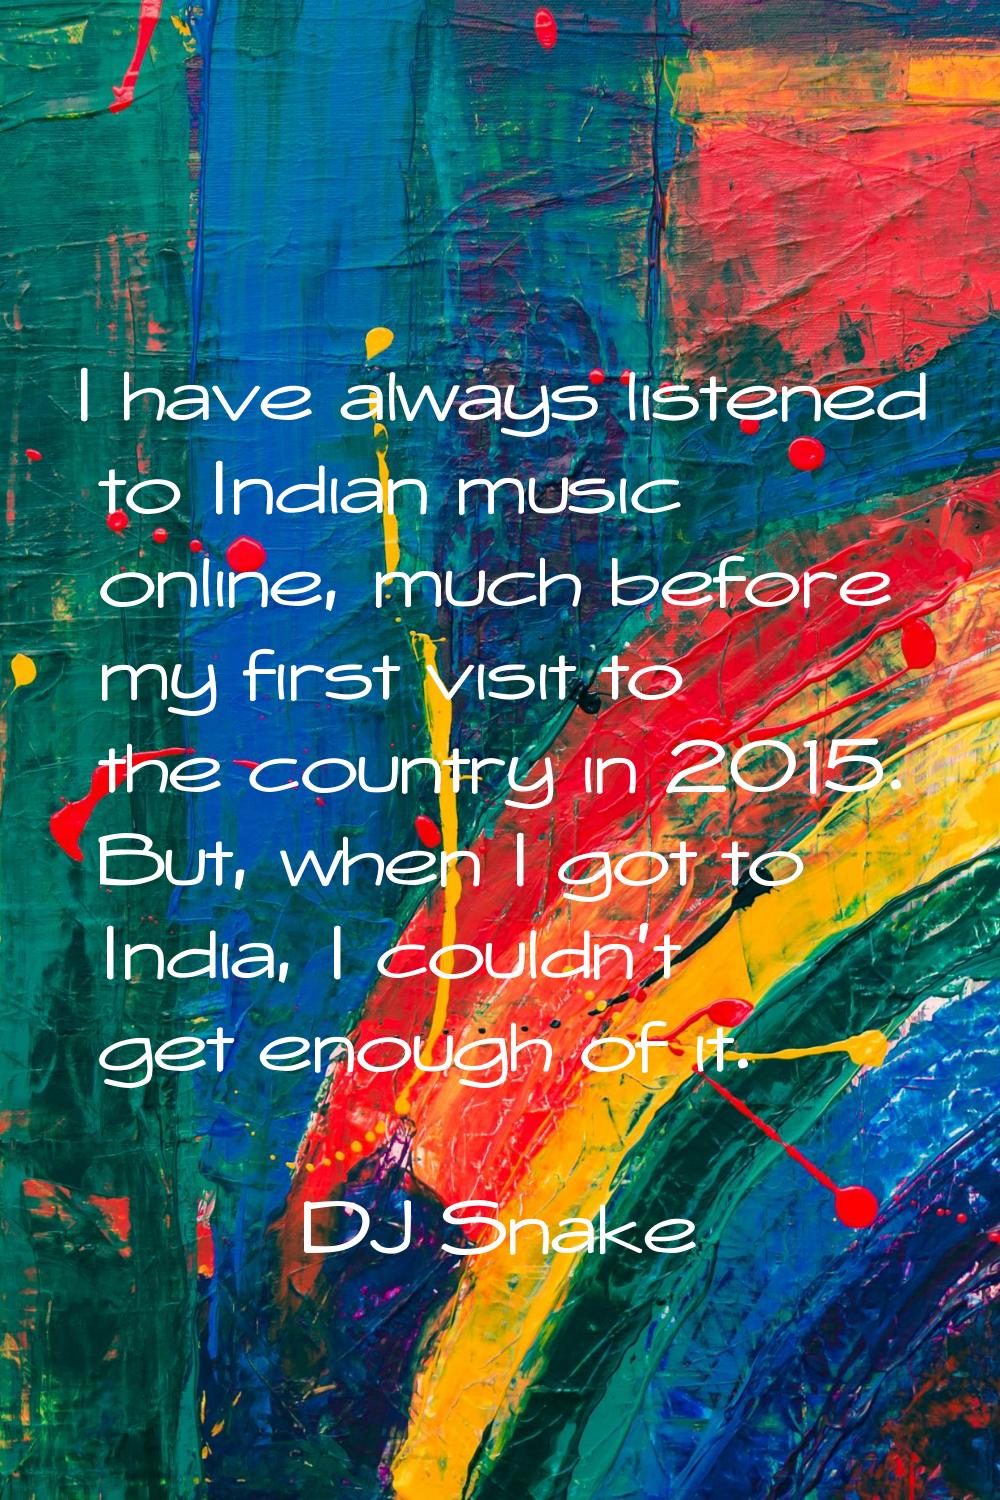 I have always listened to Indian music online, much before my first visit to the country in 2015. B